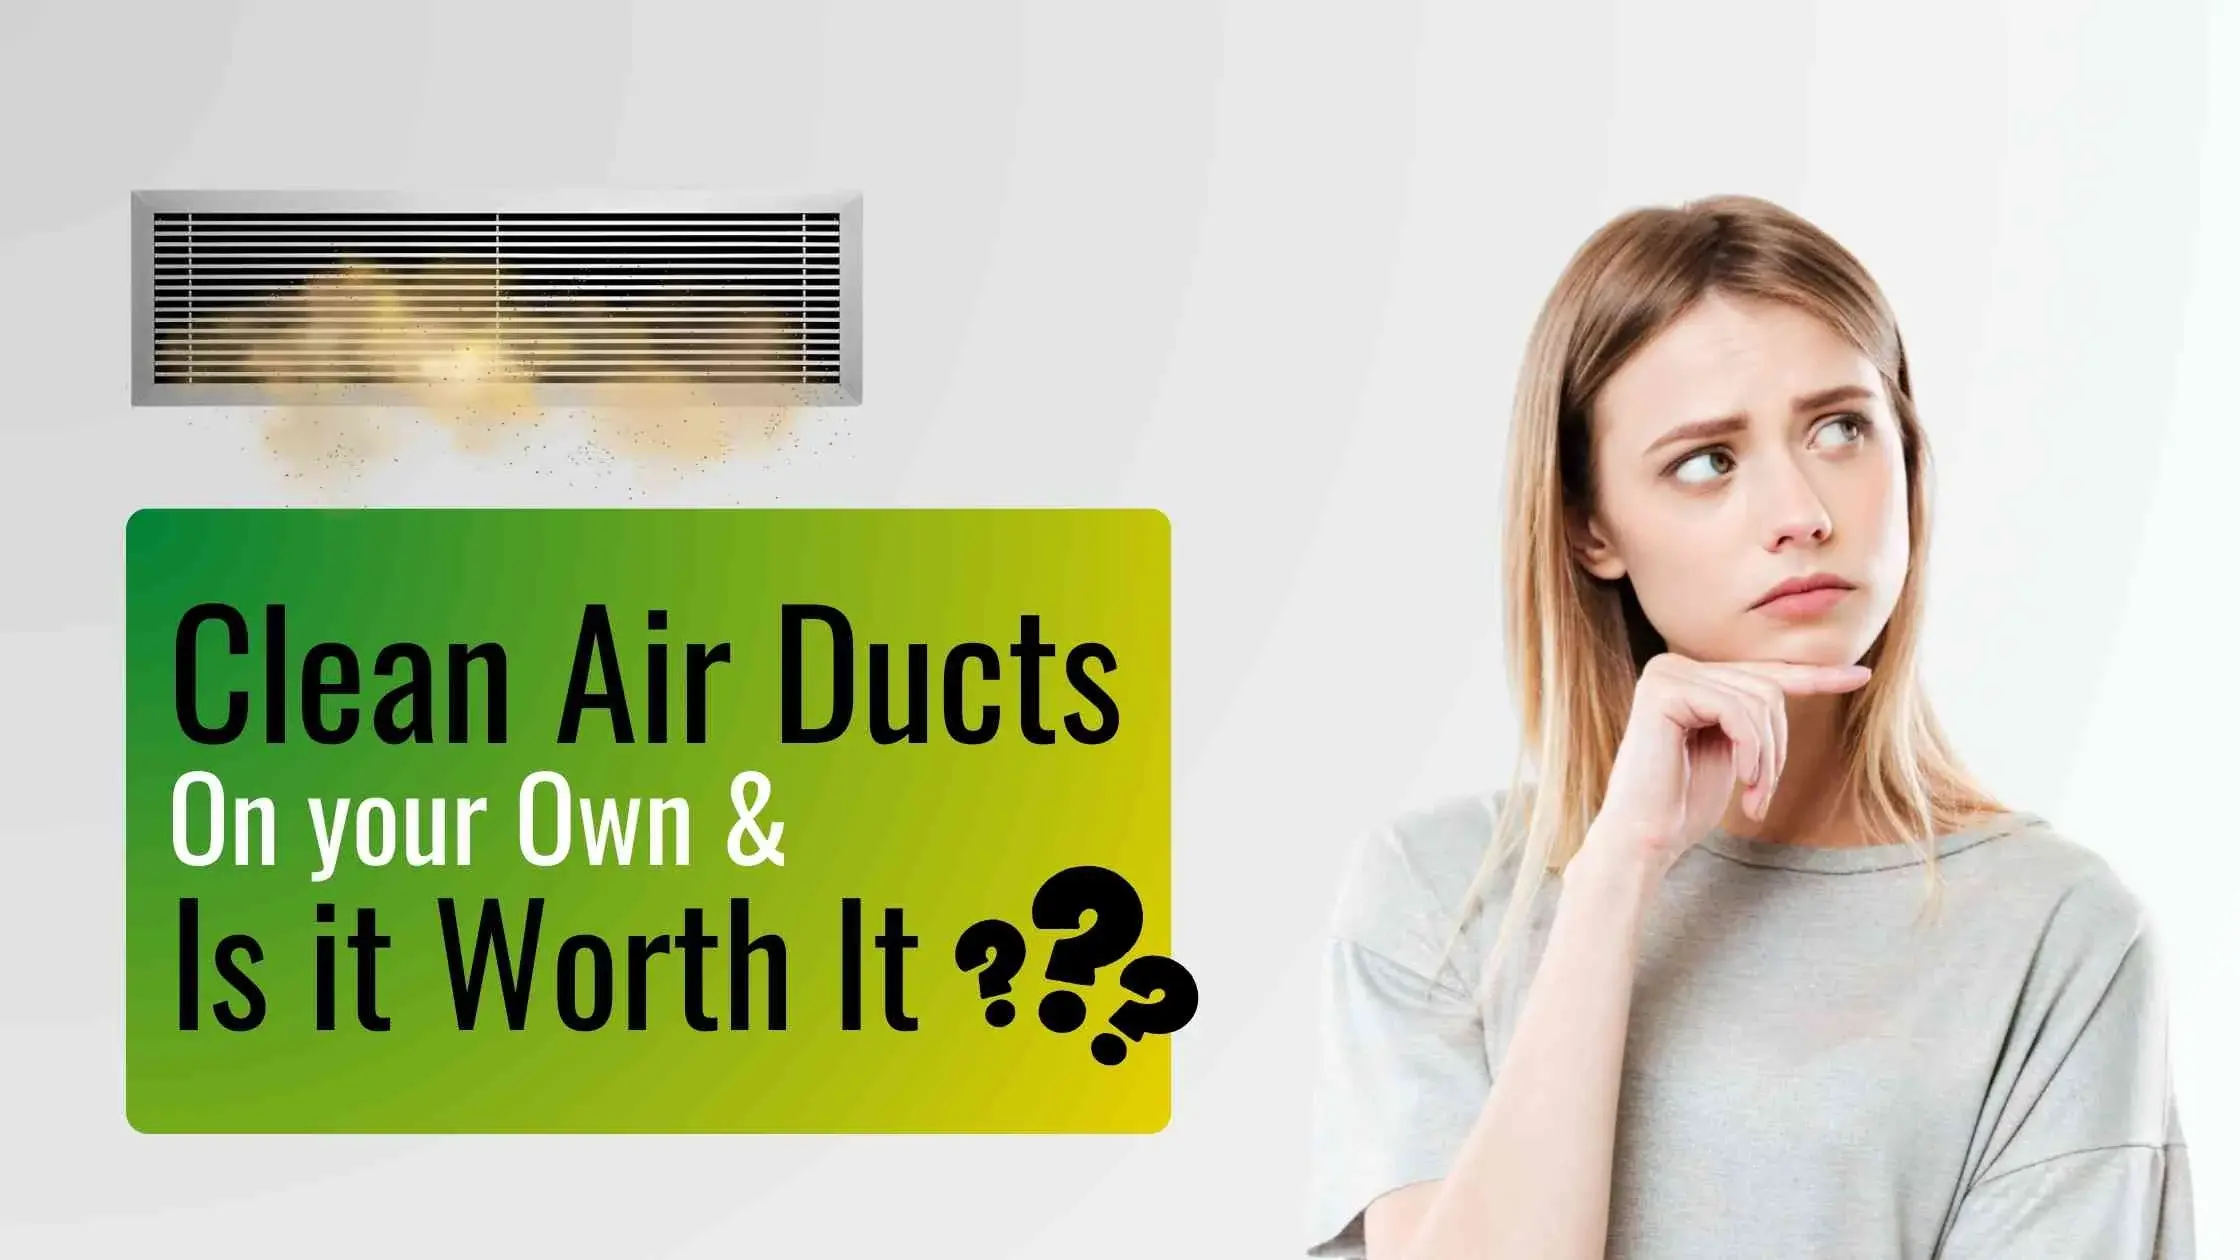 Air Duct Cleaning by your own: Worth It or Risky